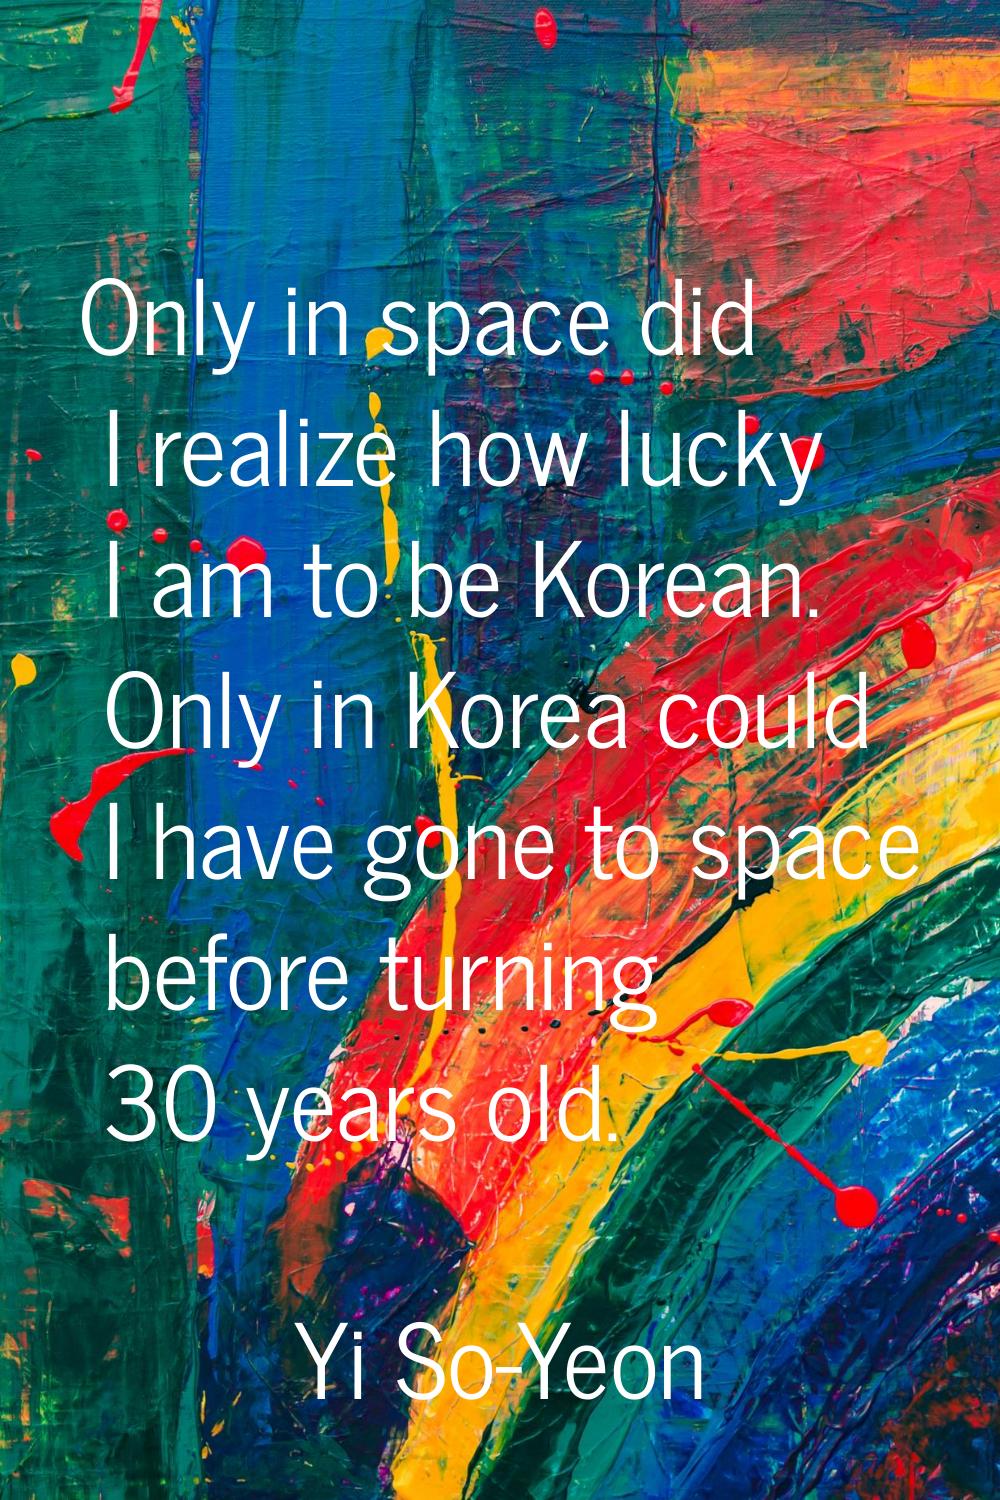 Only in space did I realize how lucky I am to be Korean. Only in Korea could I have gone to space b